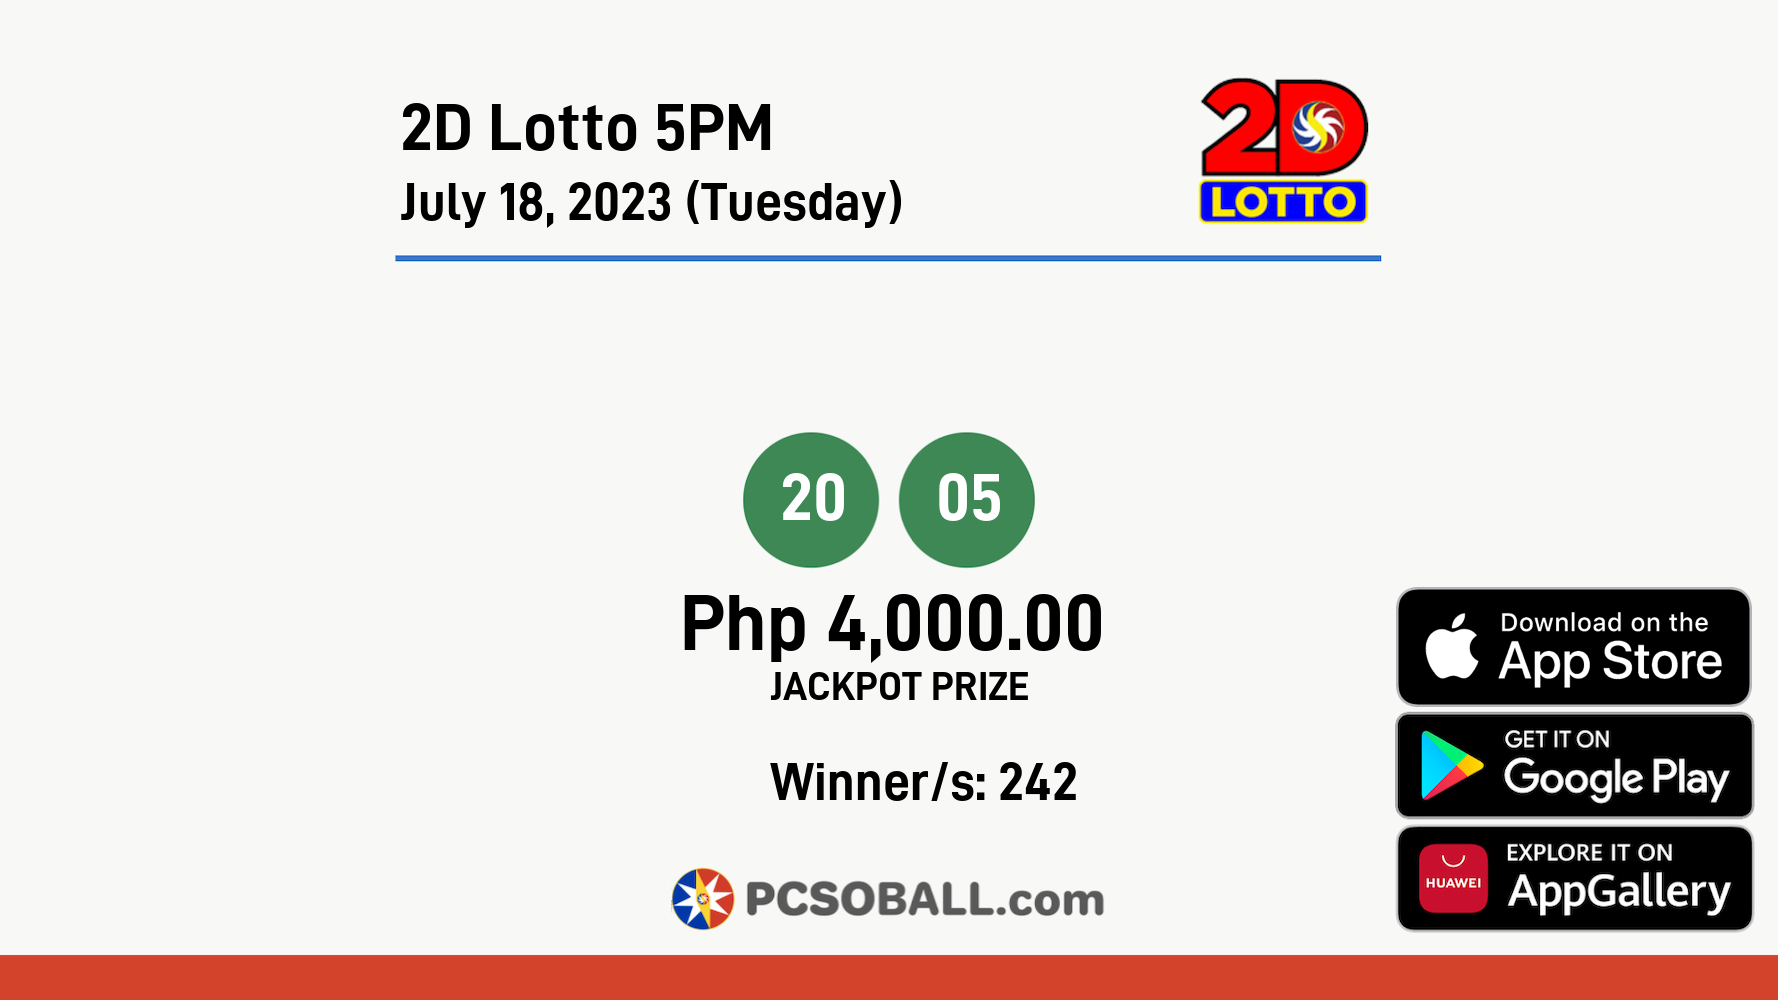 2D Lotto 5PM July 18, 2023 (Tuesday) Result